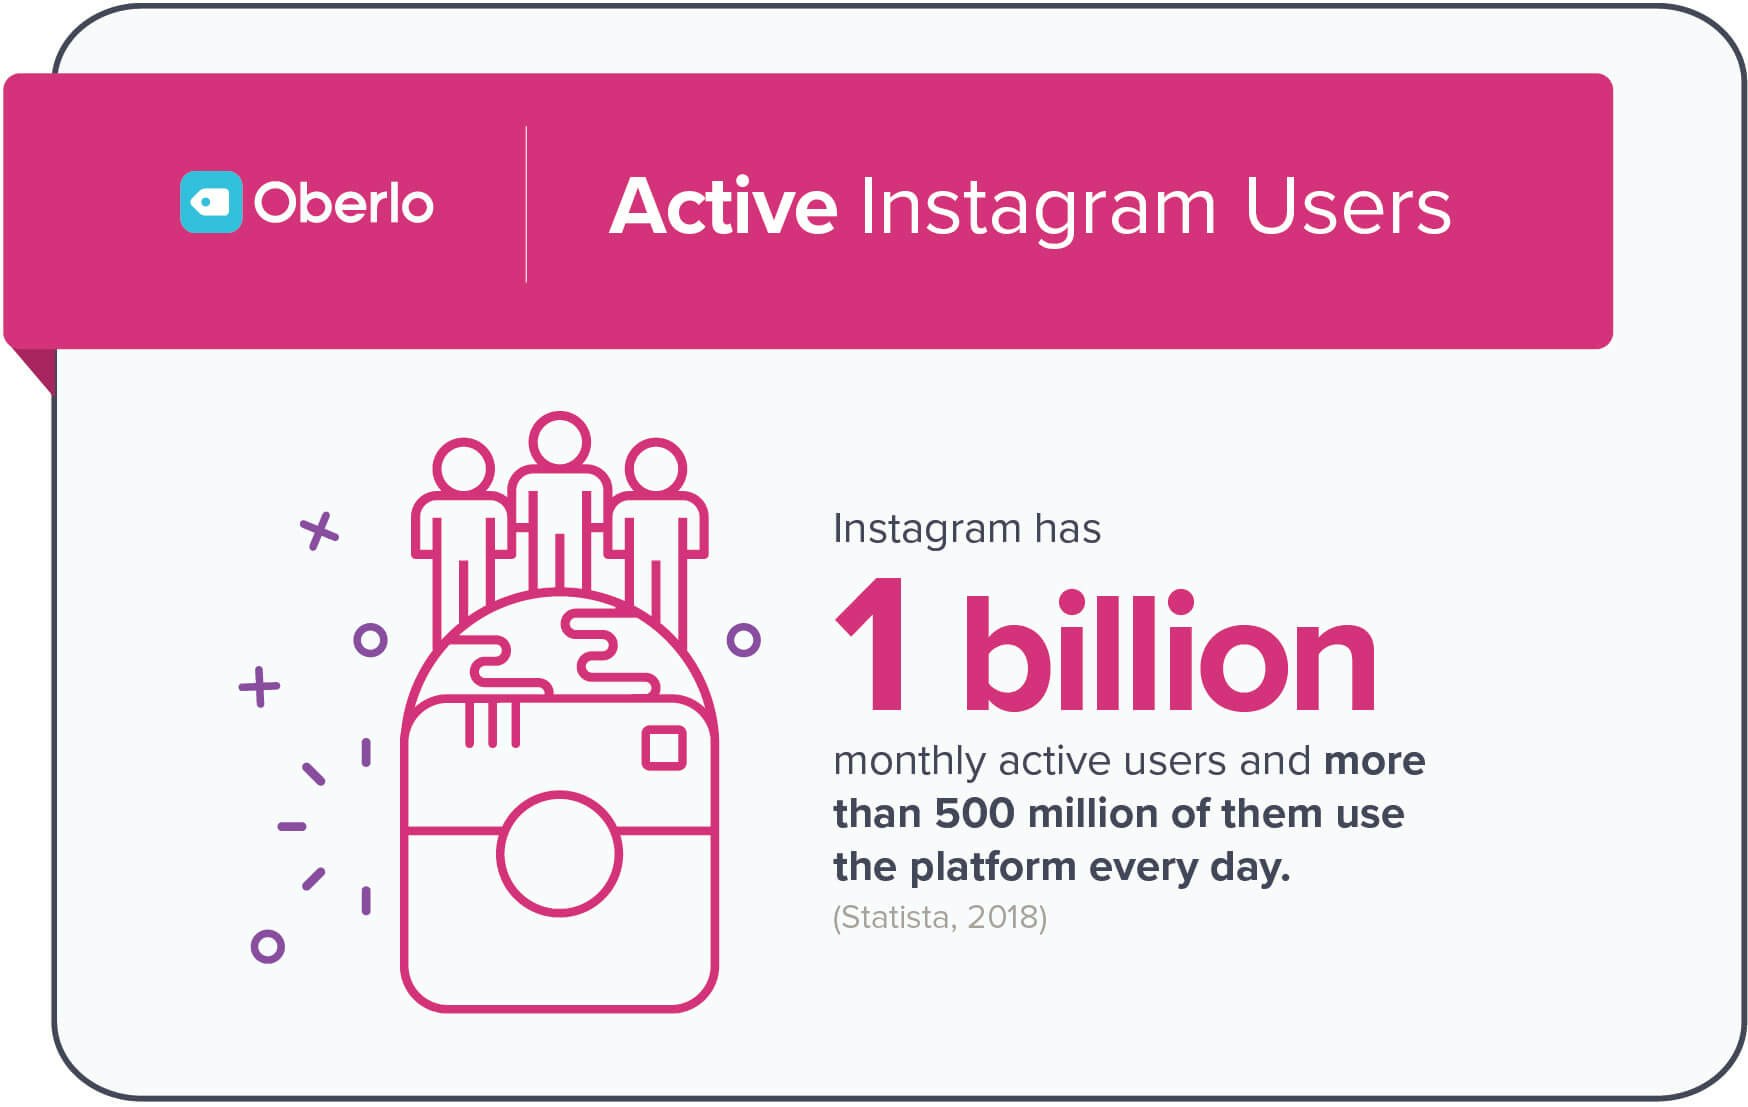 Instagram has 500 million daily active users